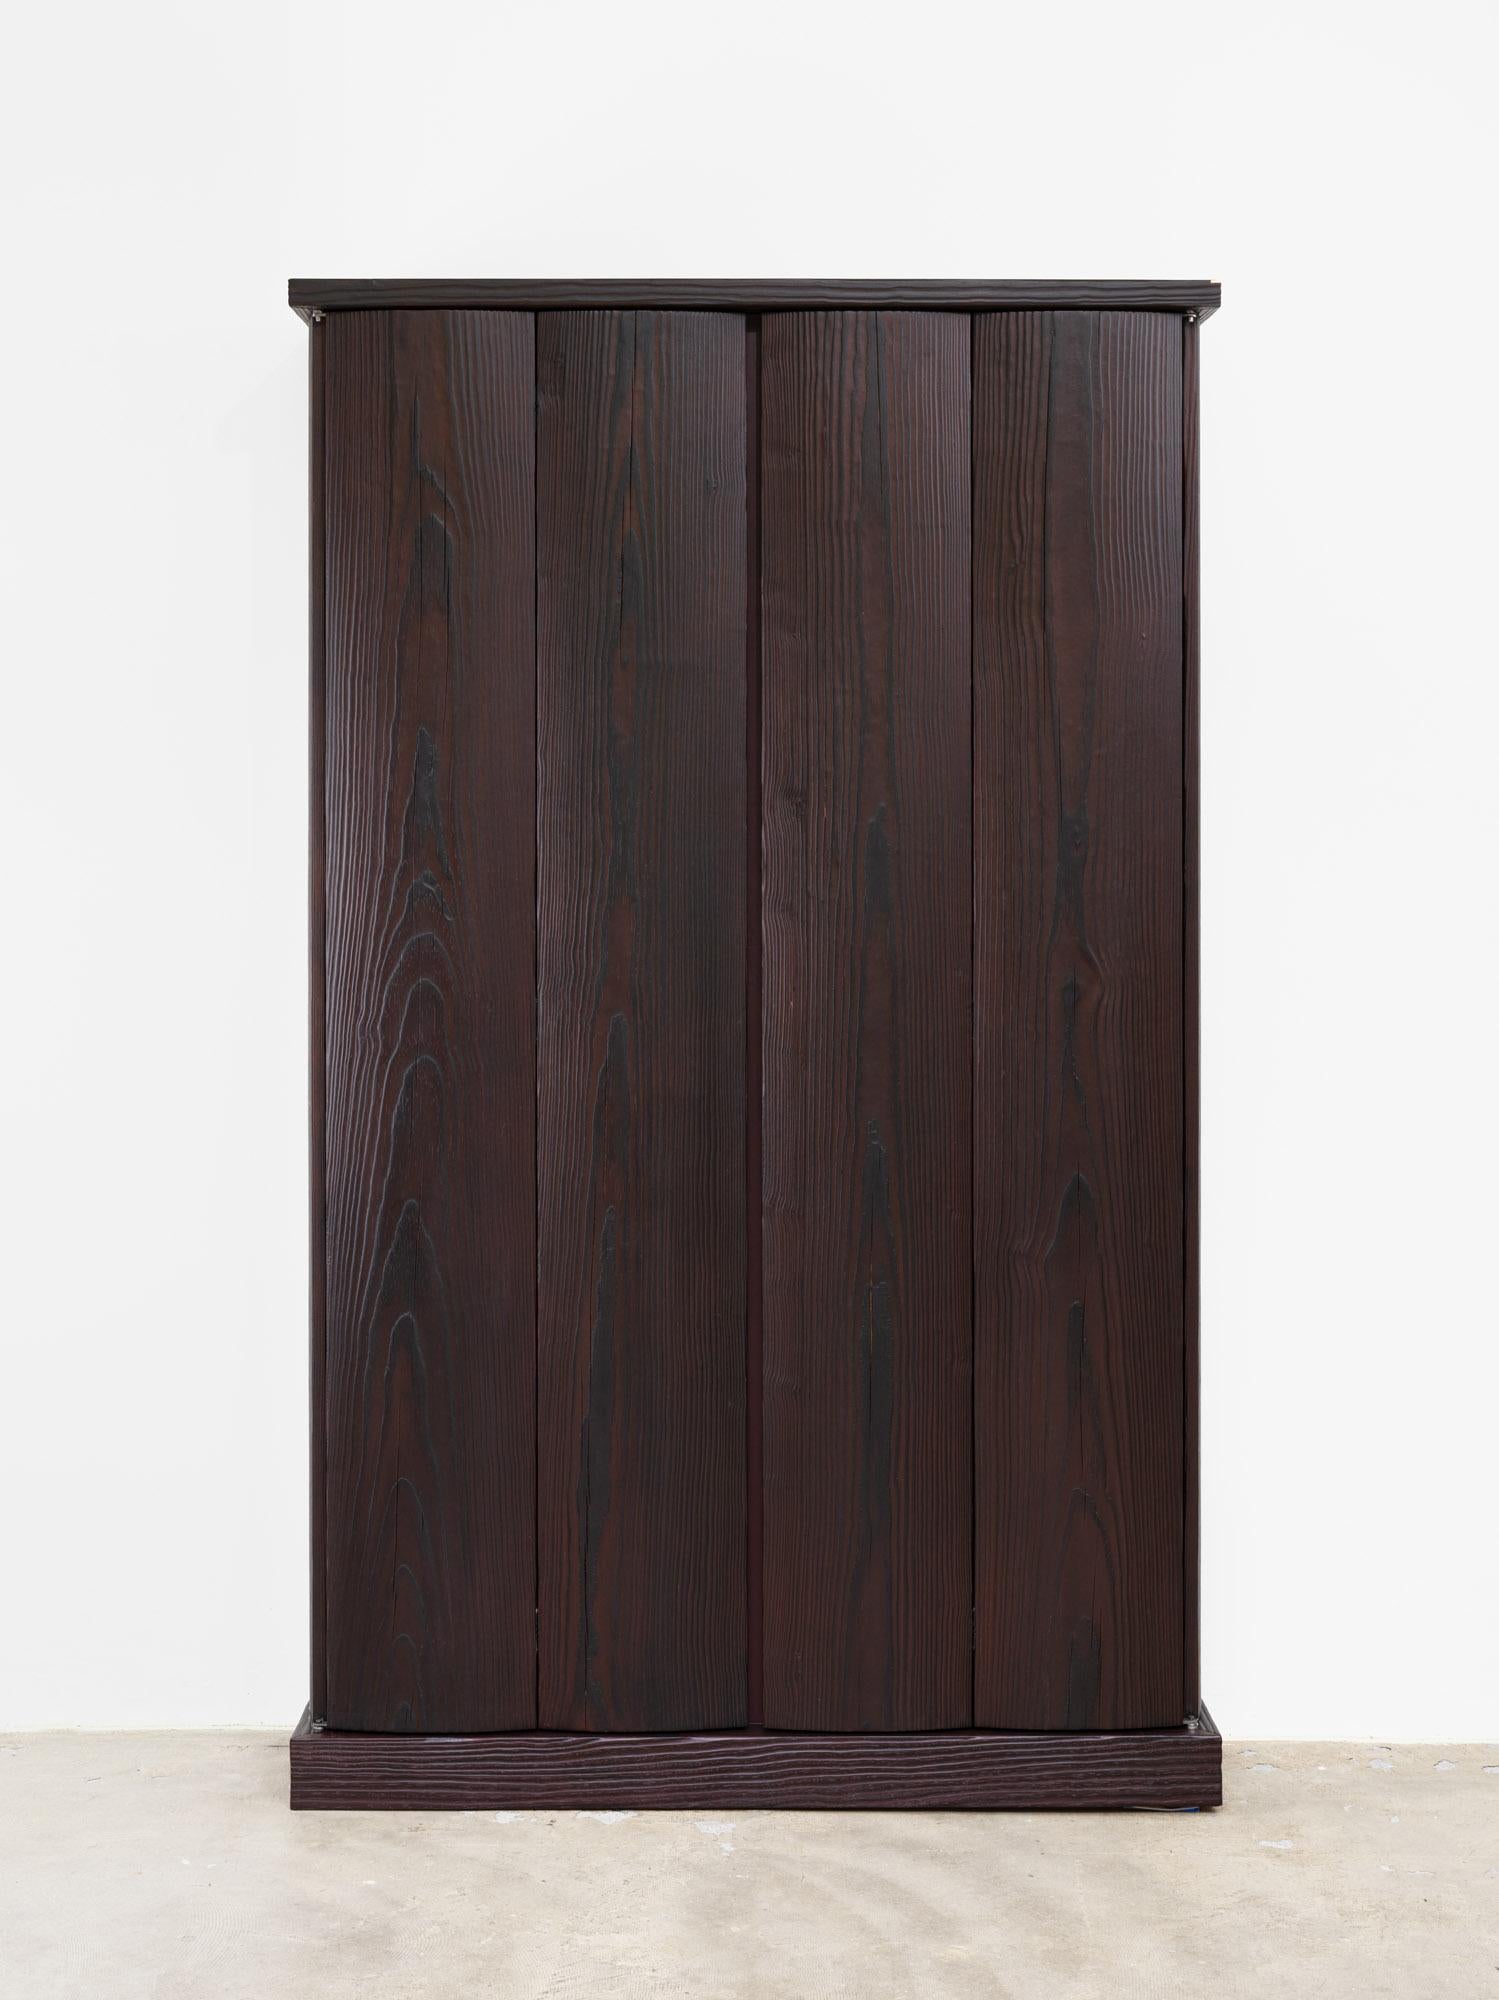 Hand-Crafted Burned Yellowpine, Night Red Stained Black Norma Cabinet by Tim Vranken For Sale